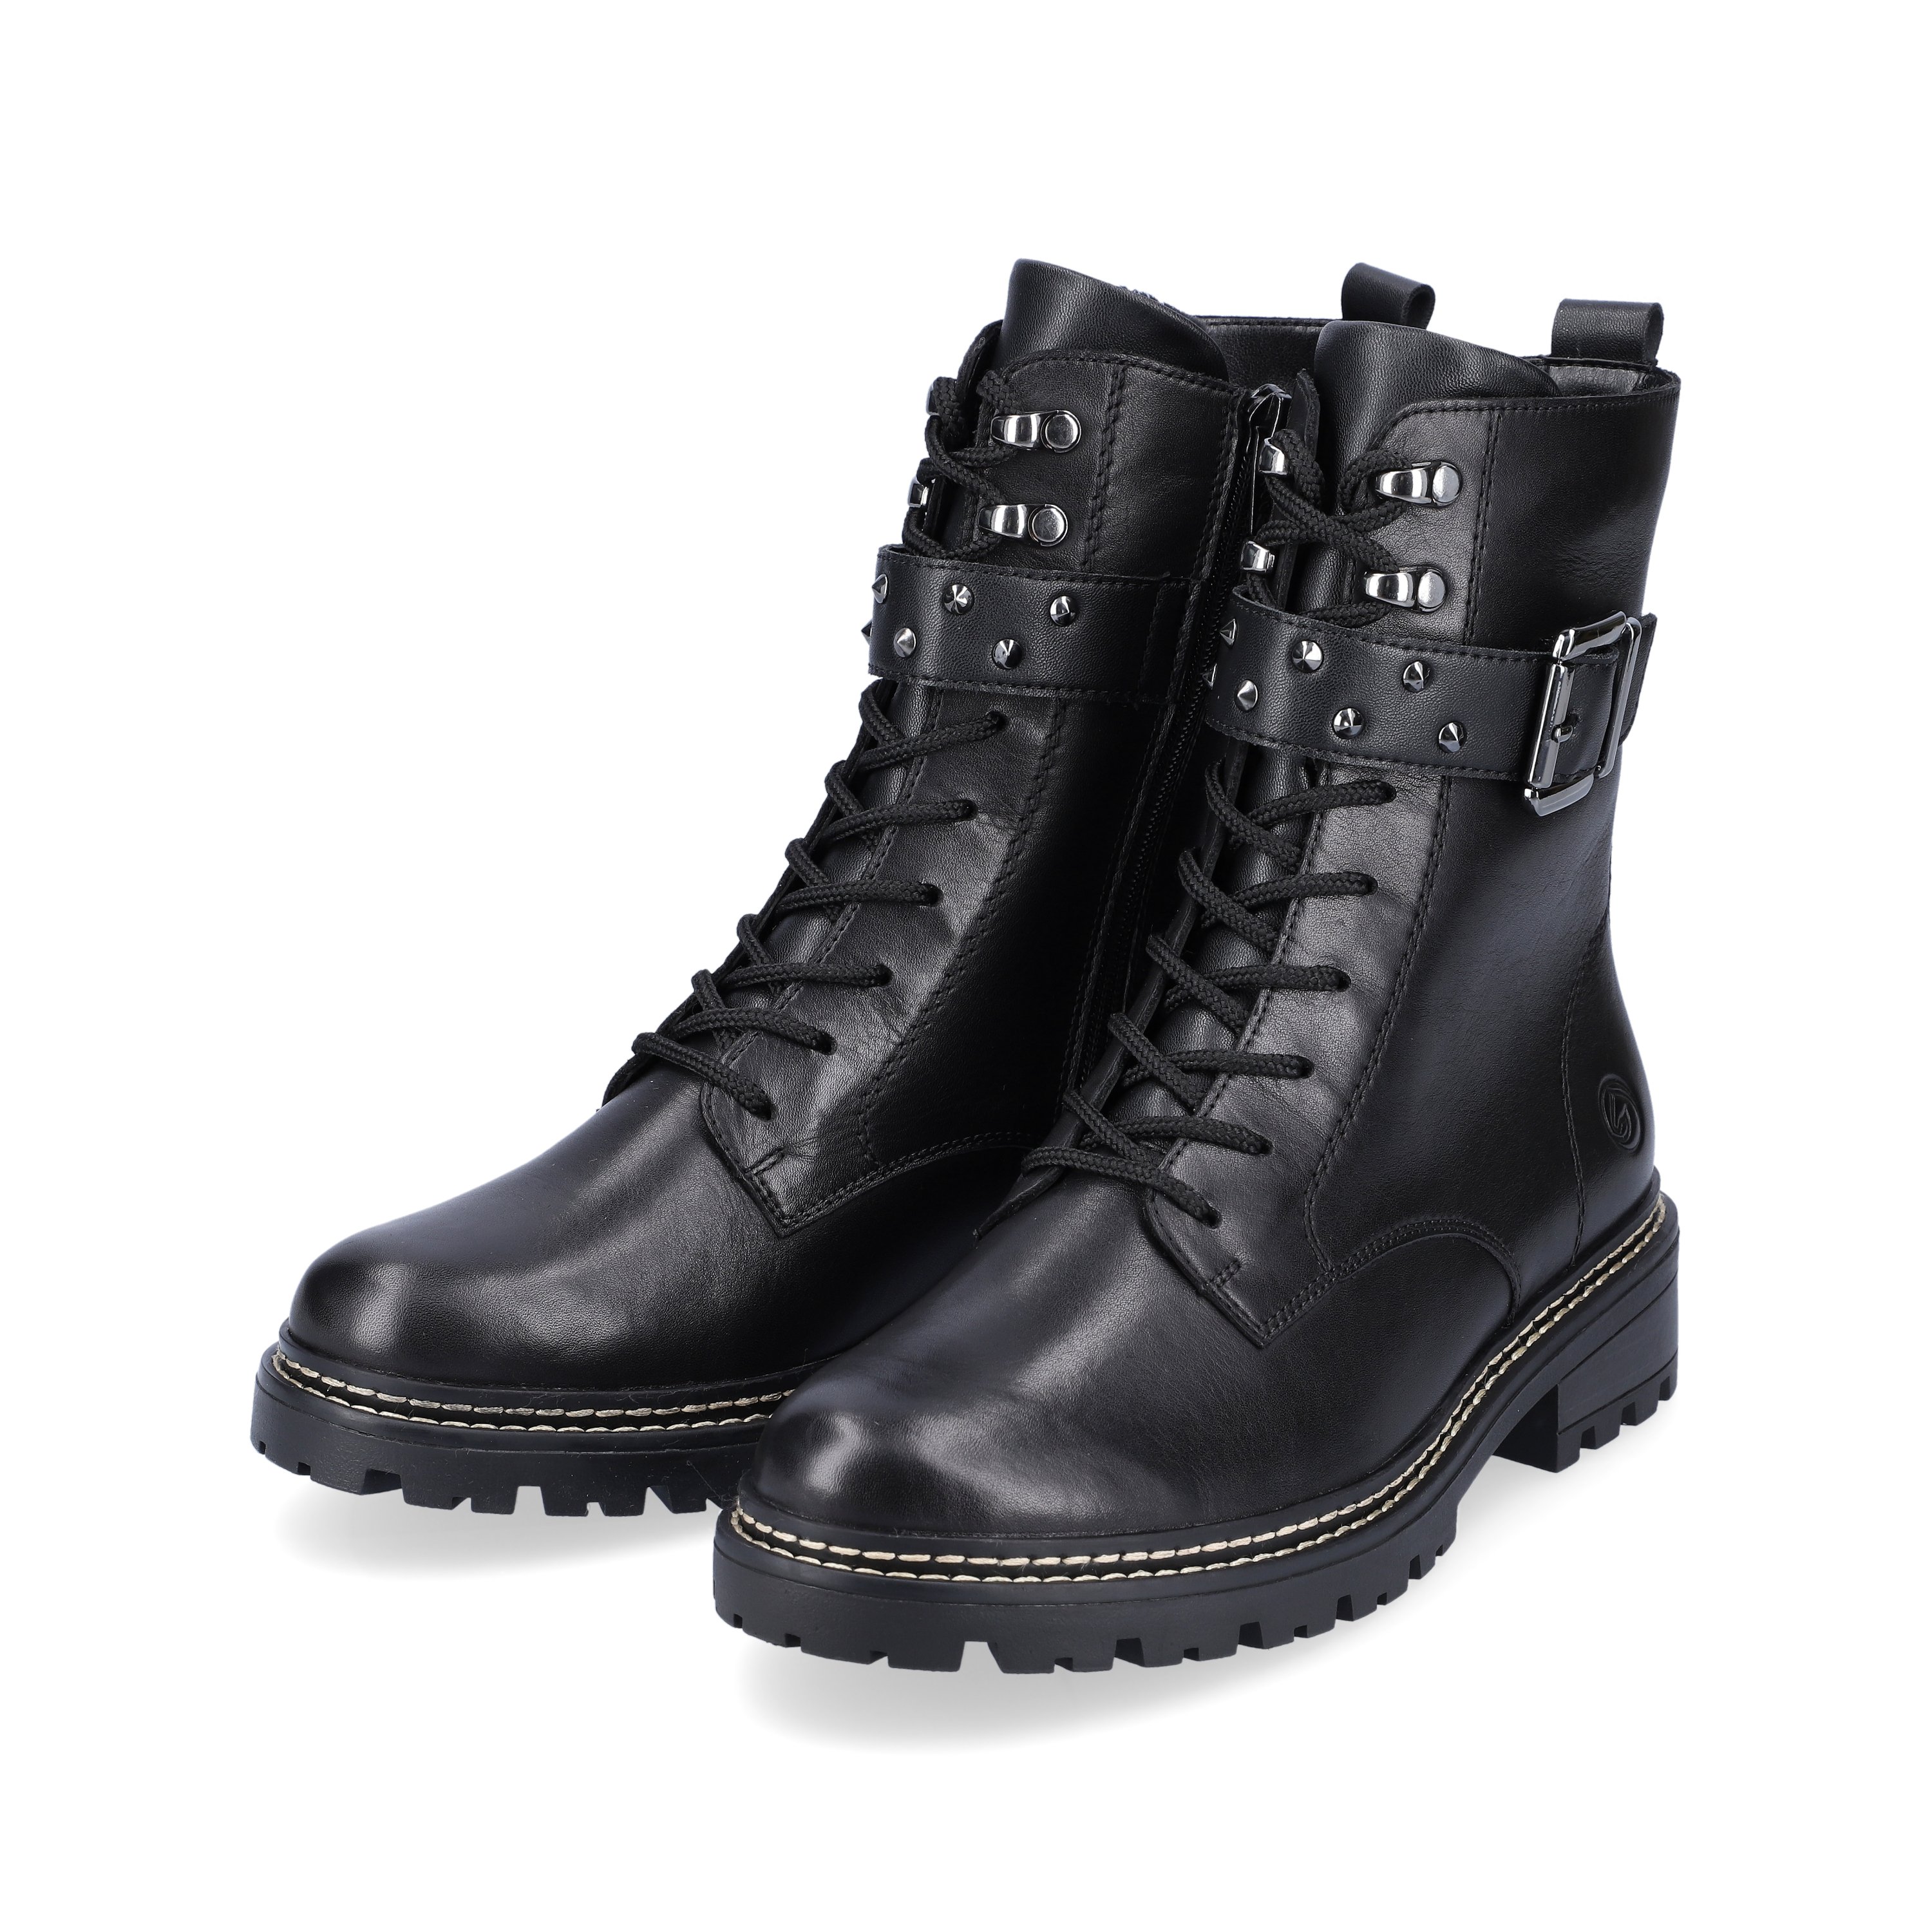 Jet black remonte women´s biker boots D0B73-01 with cushioning profile sole. Shoe laterally